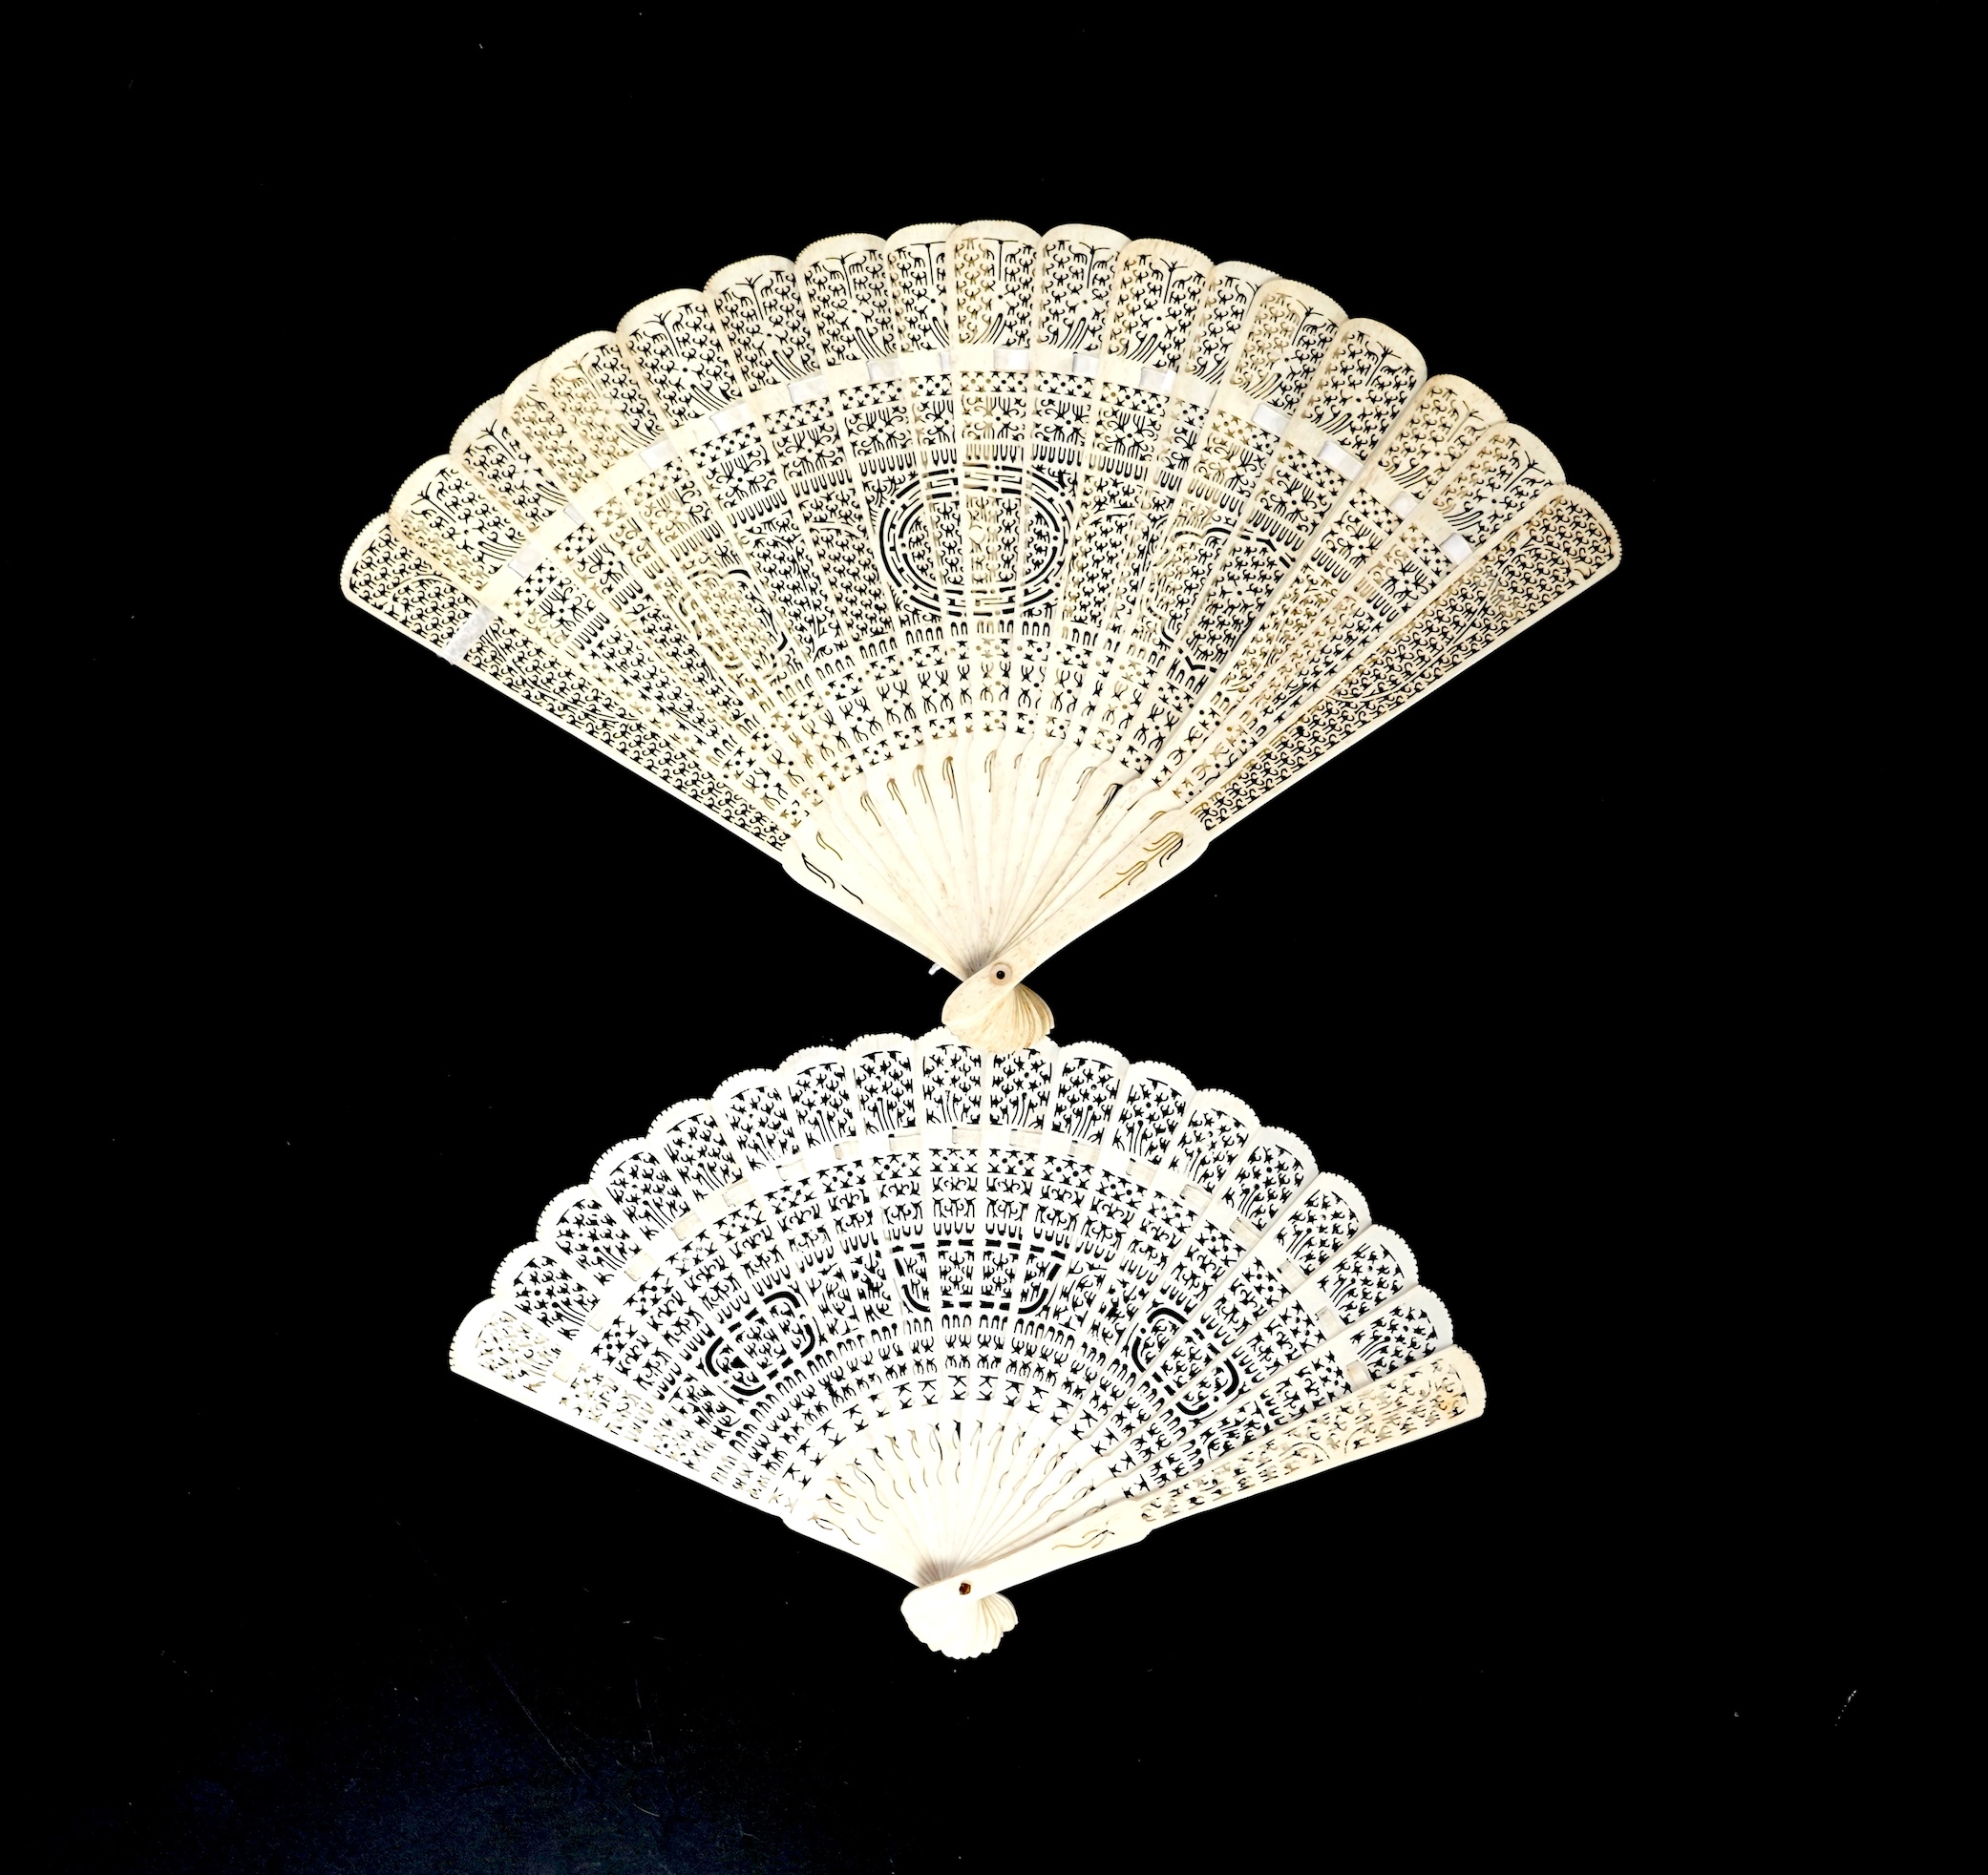 A mid 19th century Chinese brisé bone fan with intricate carving and a later smaller similar fan